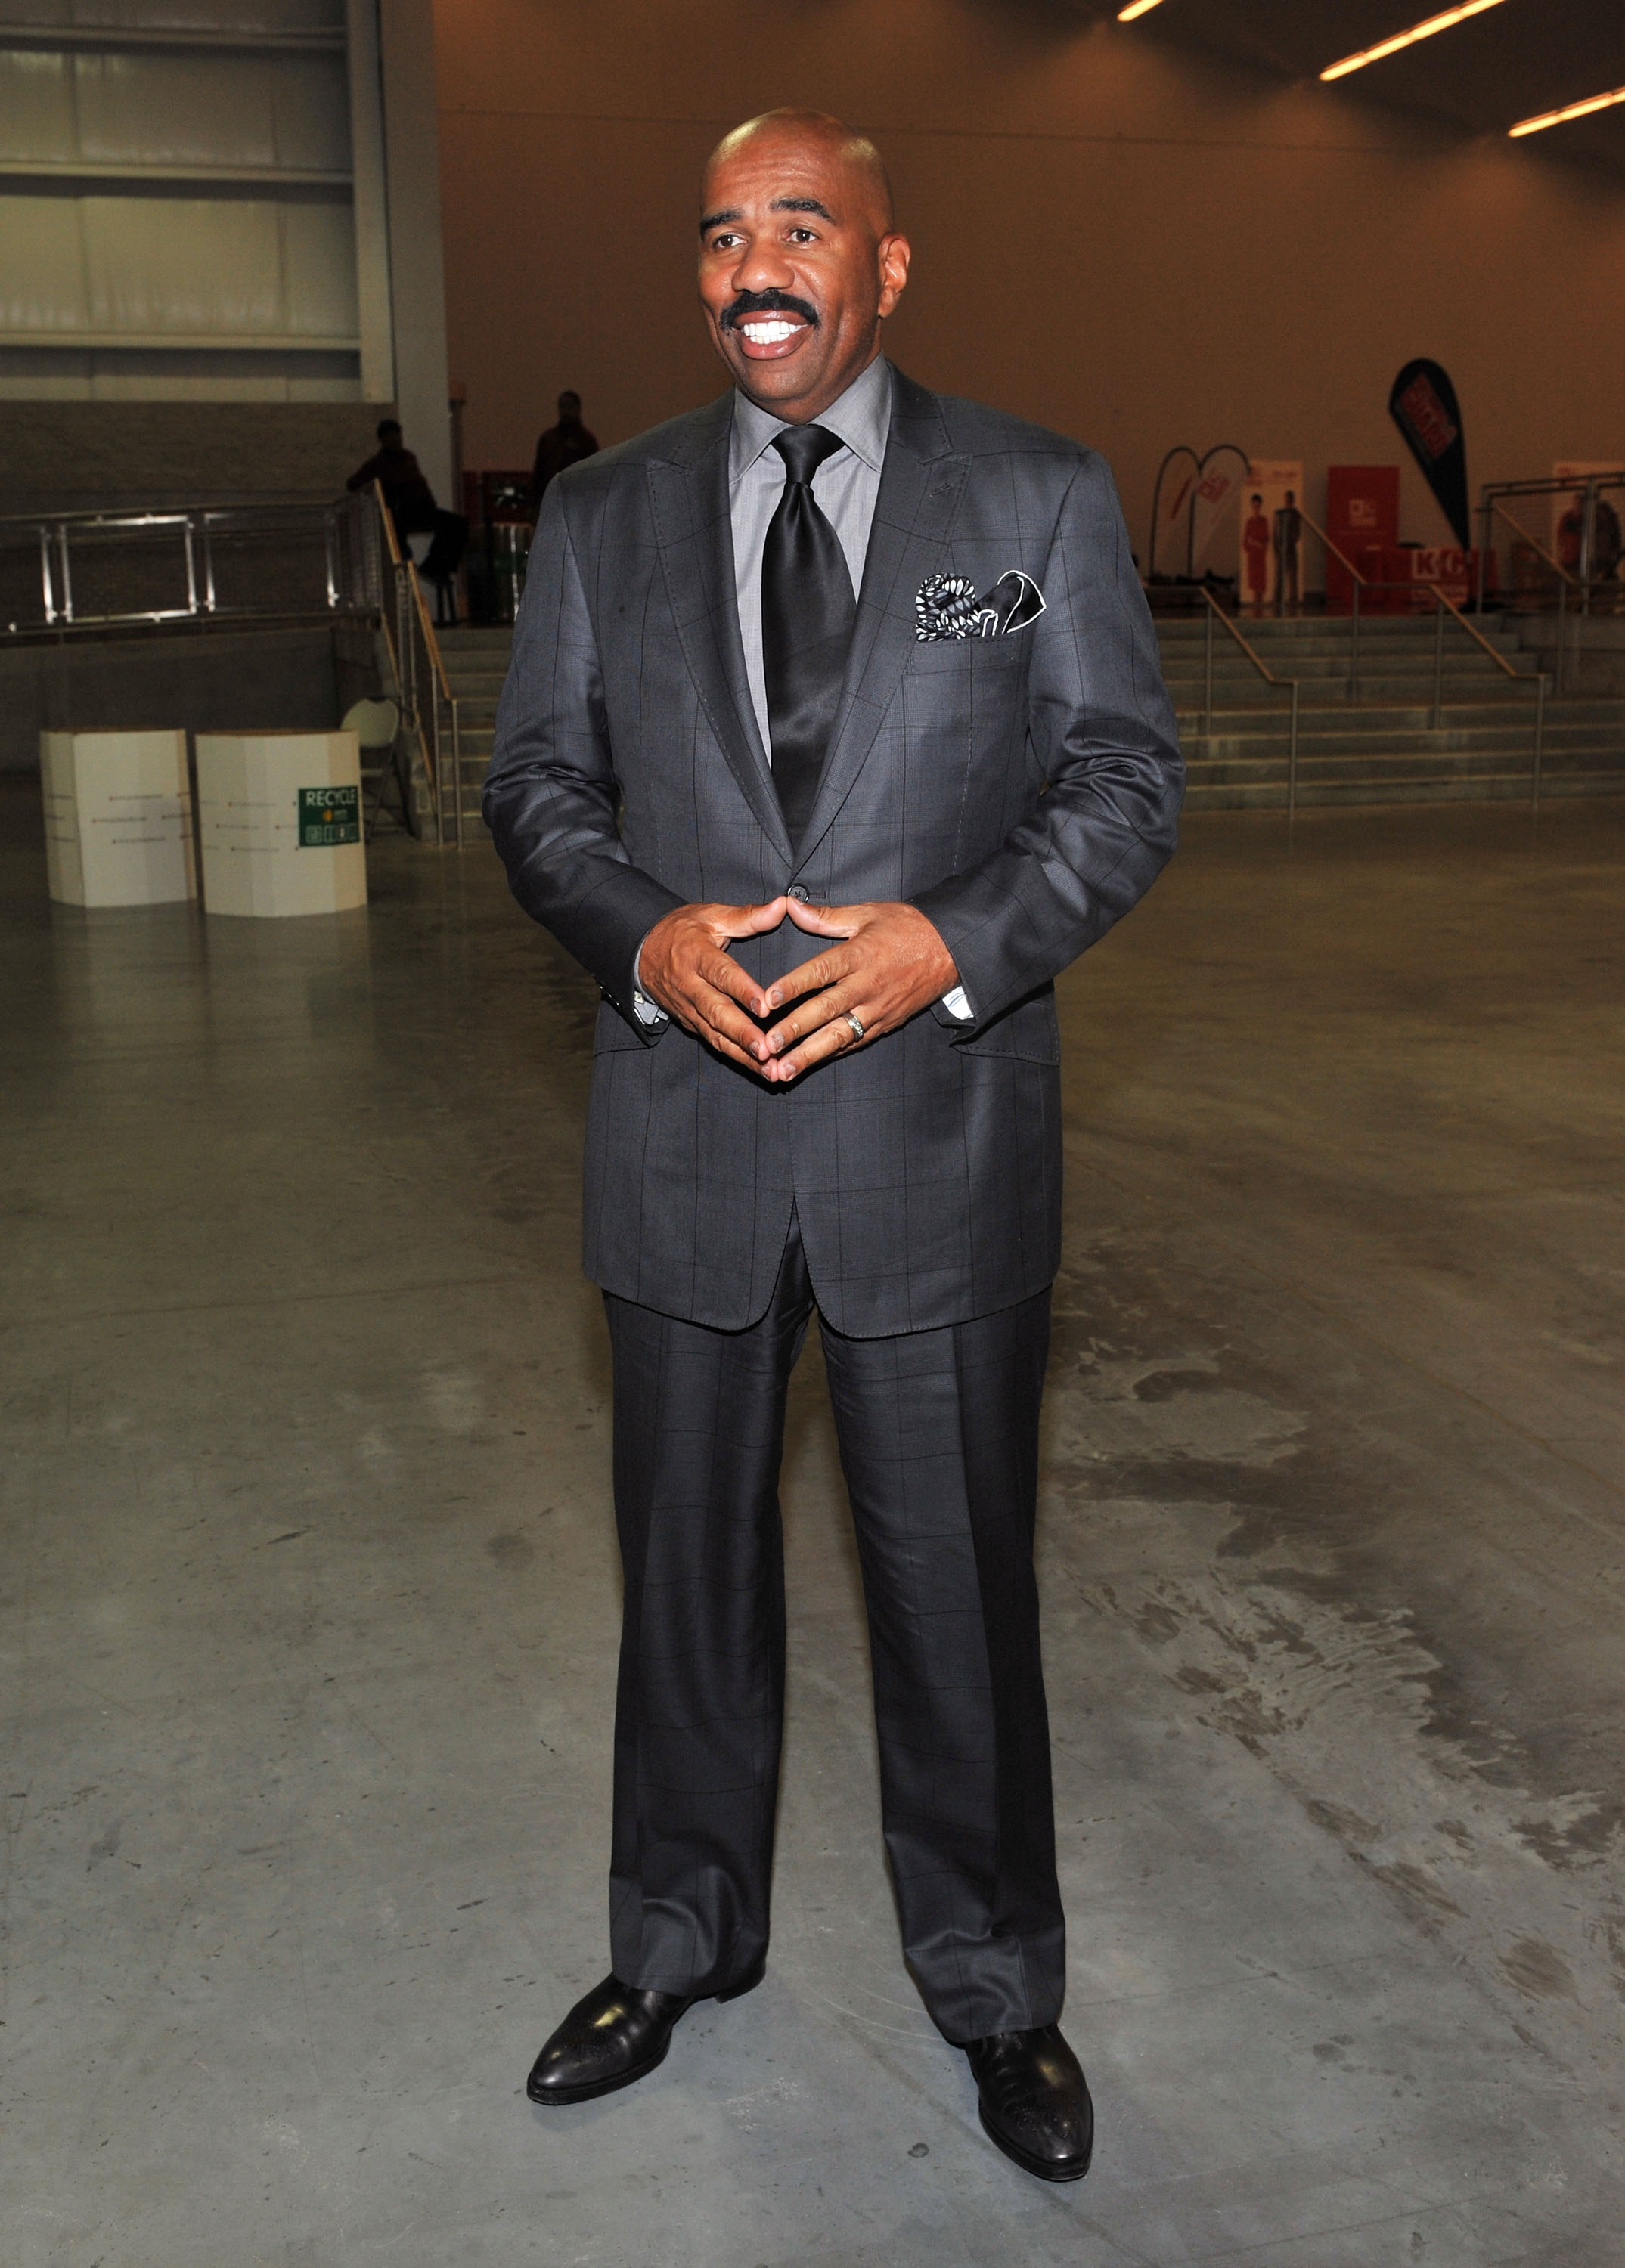 Steve Harvey attends the Steve Harvey Mentoring Weekend in New York City on October 7, 2011 | Photo: Getty Images